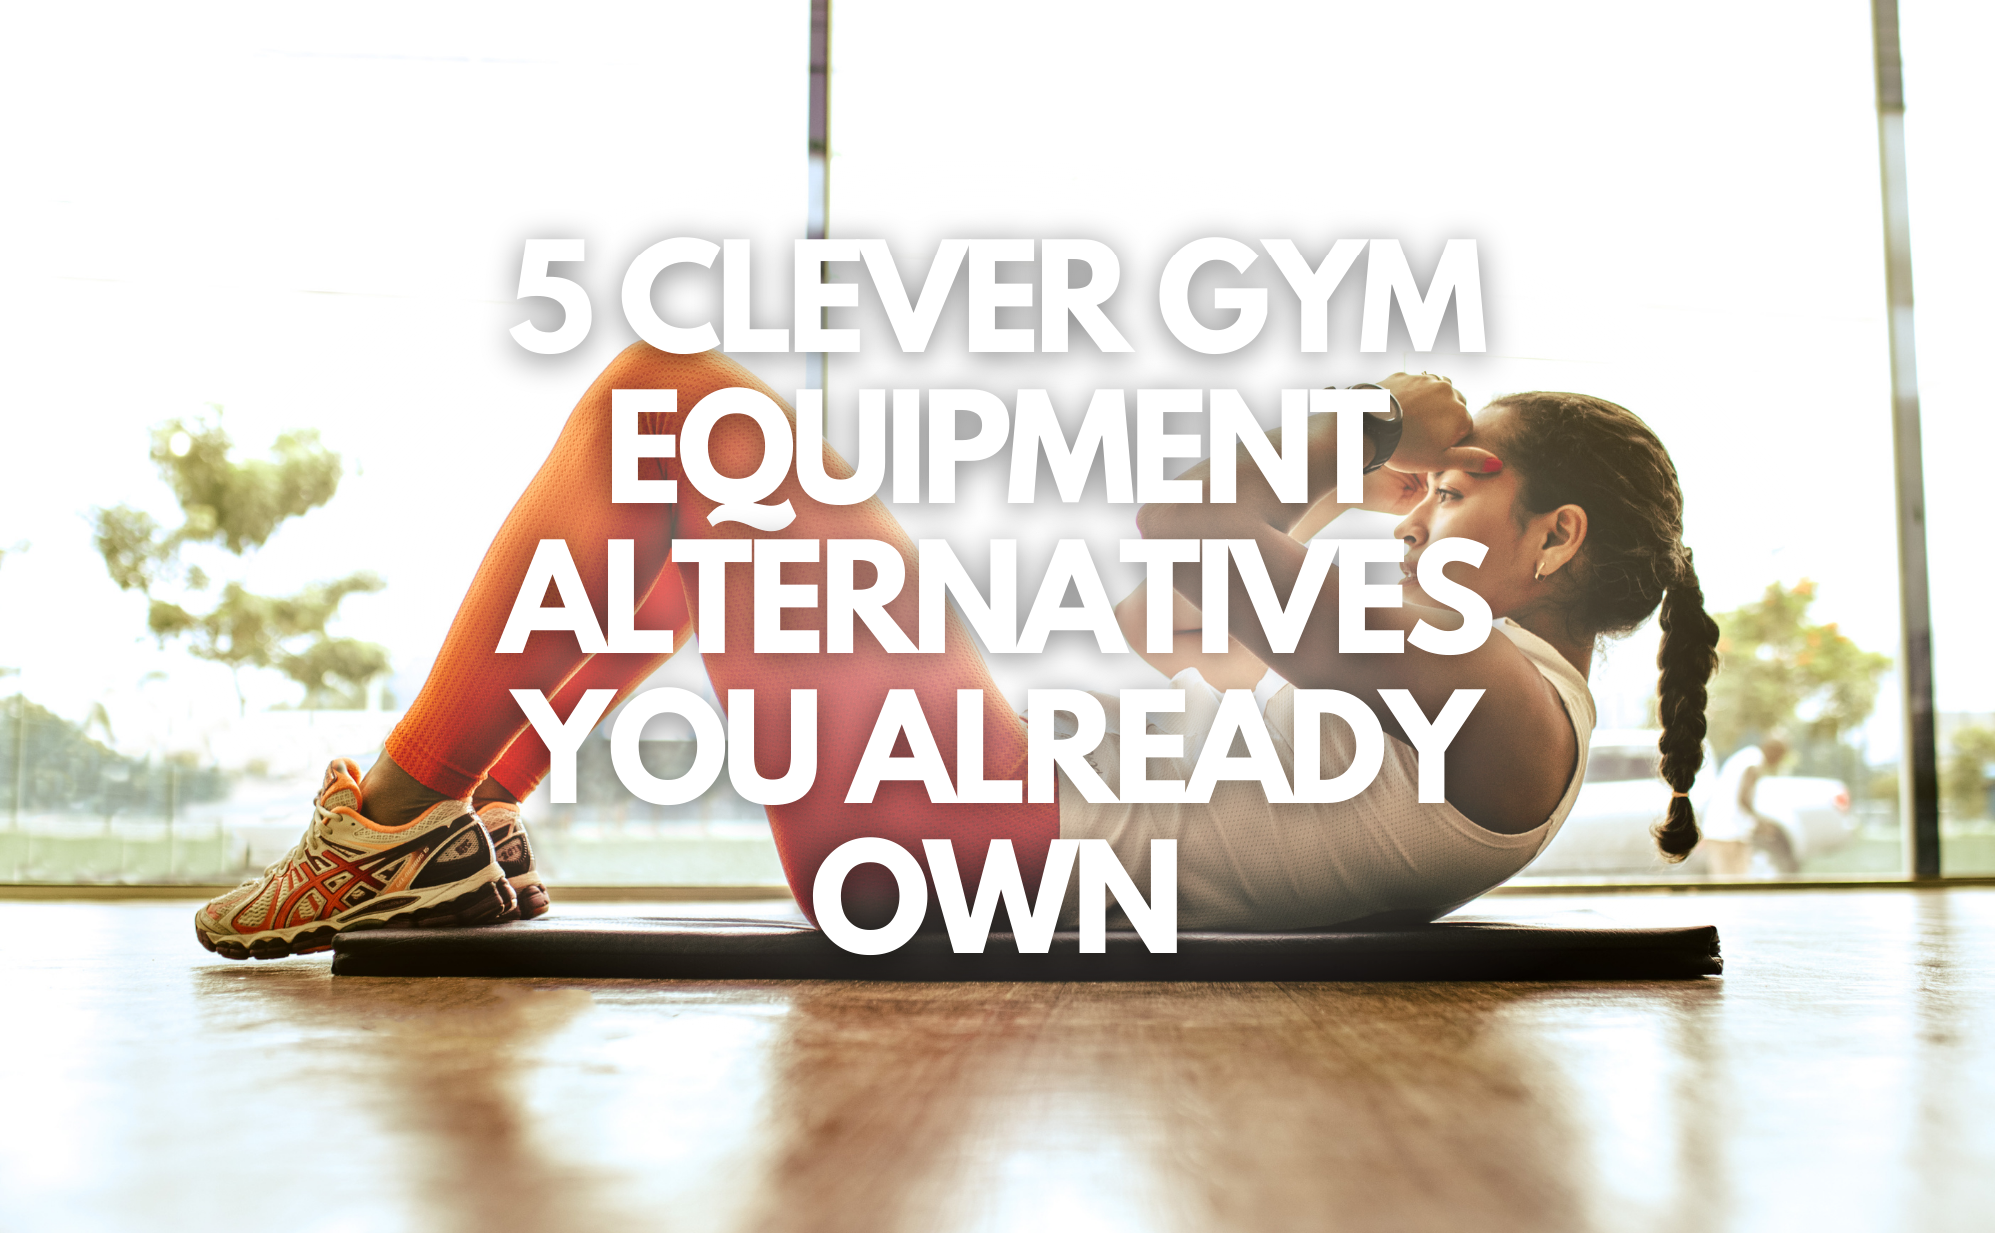 5 Clever Gym Equipment Alternatives You Already Own